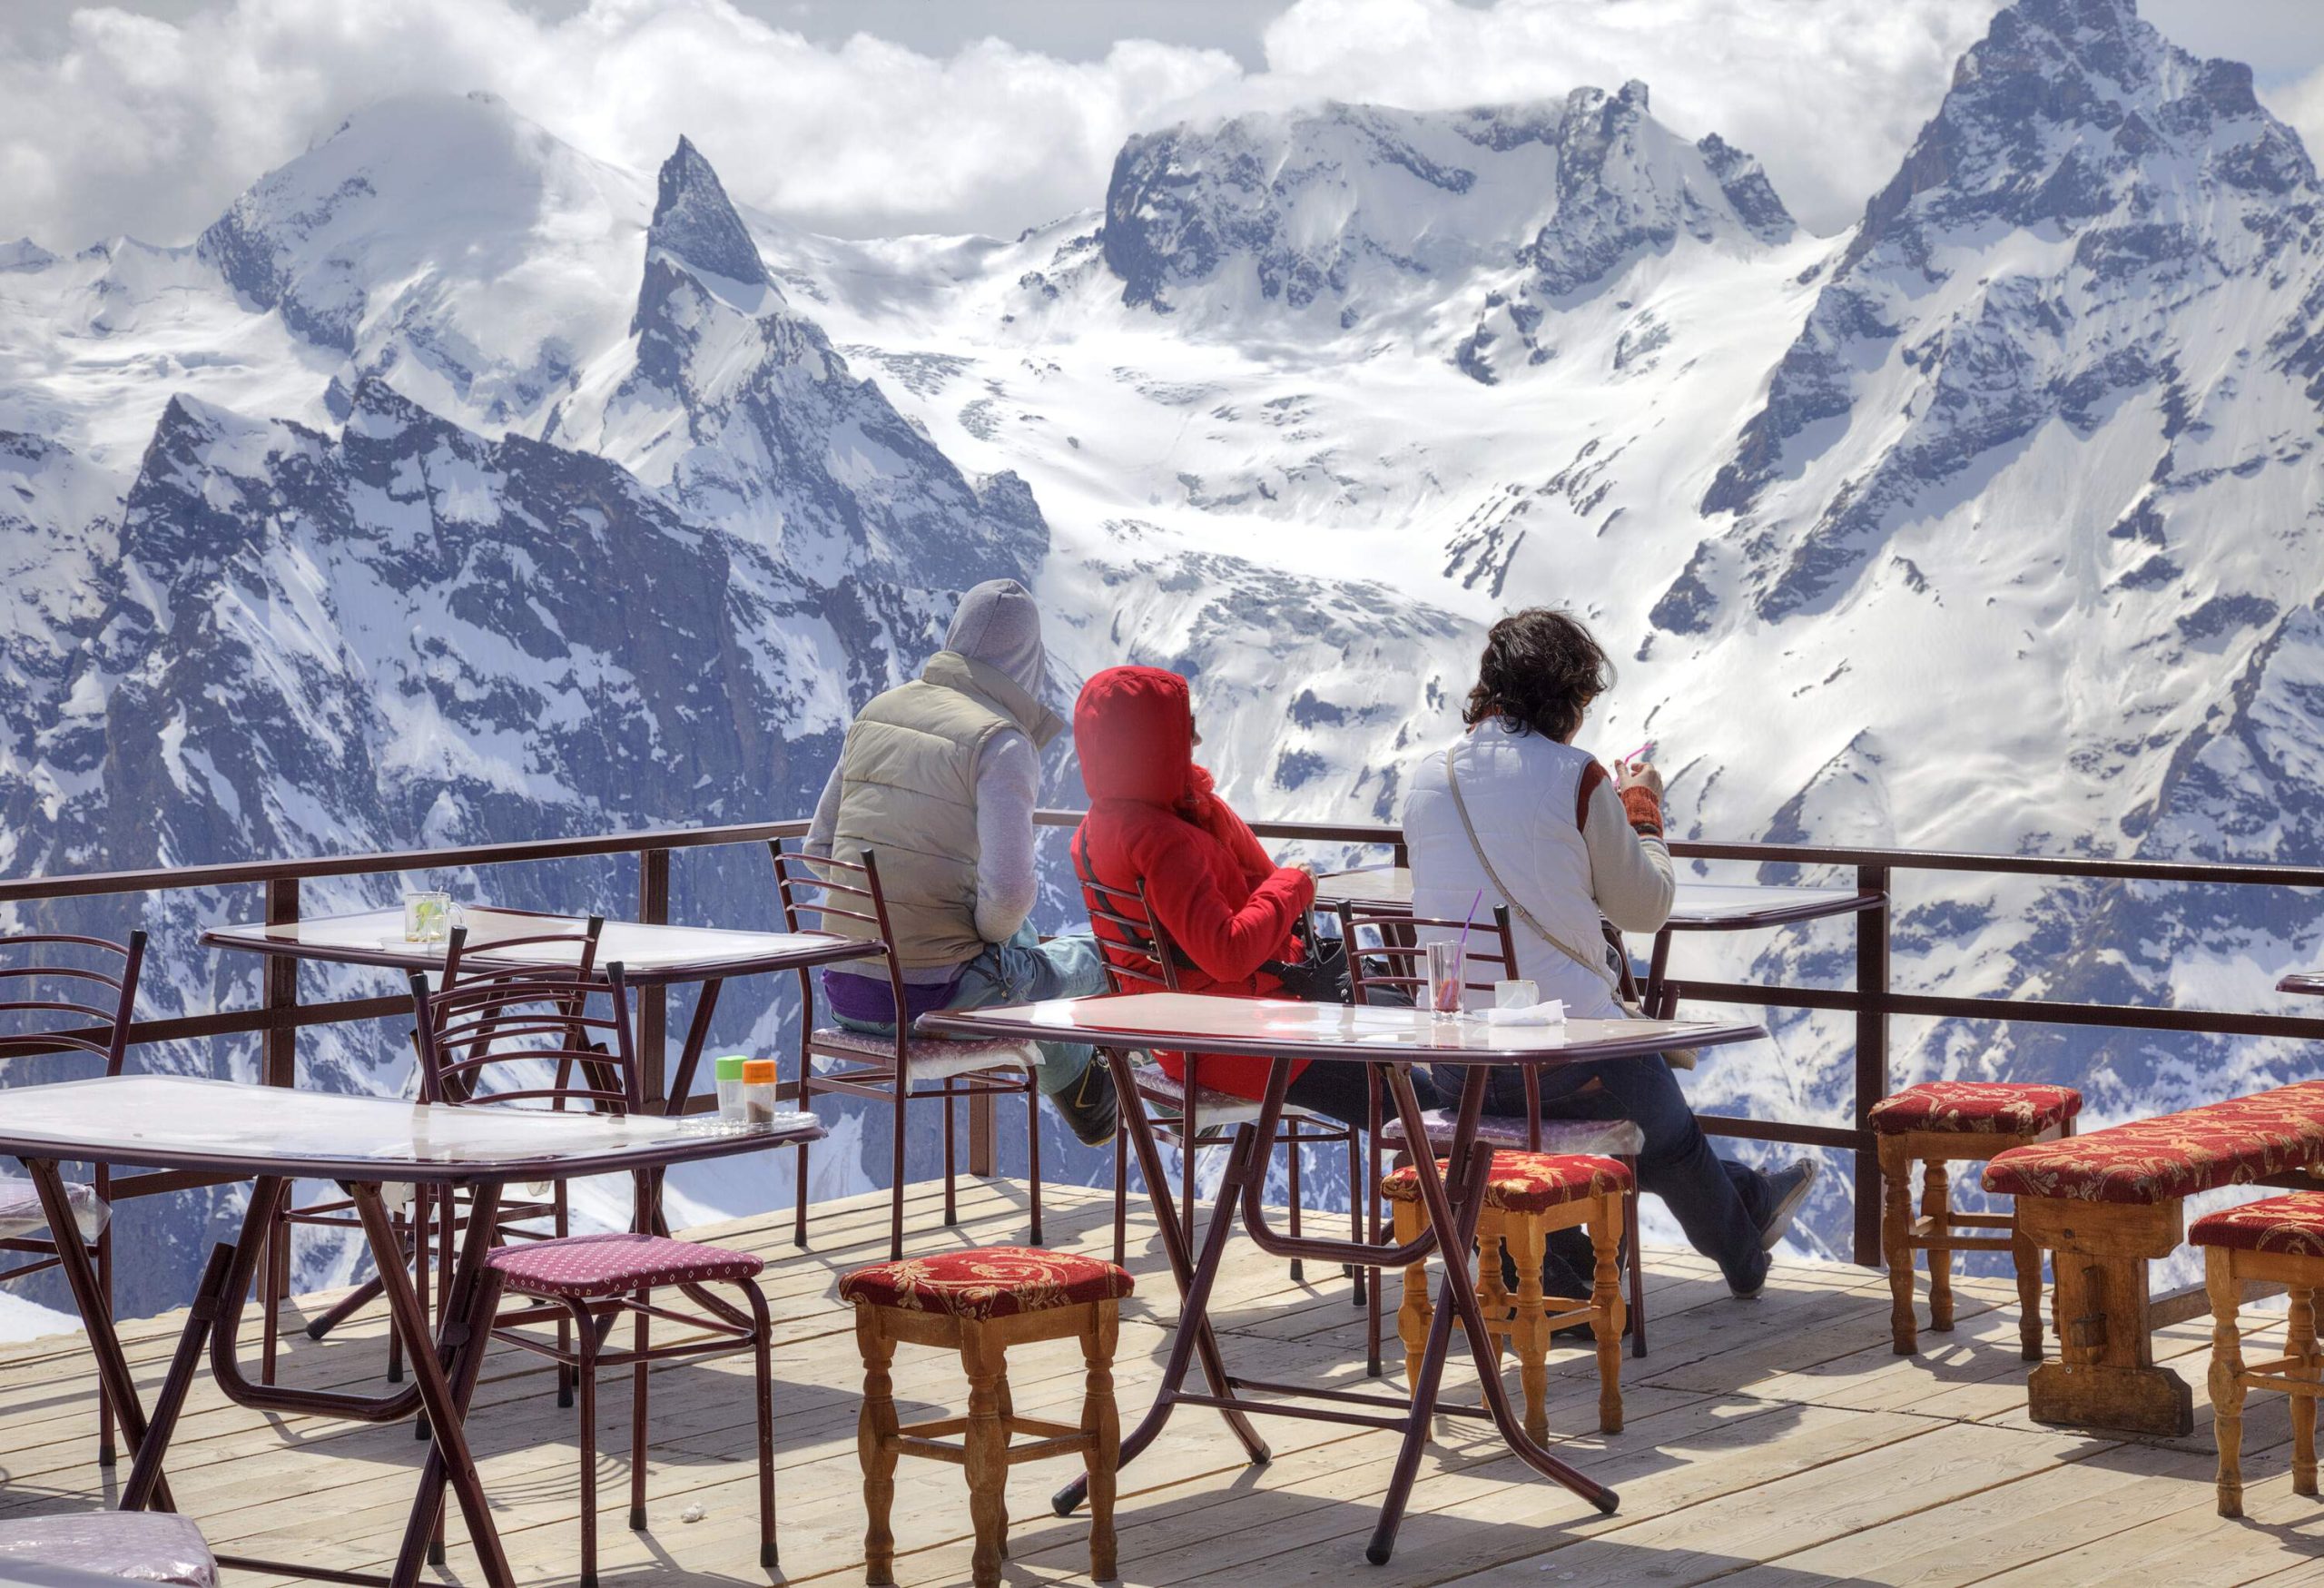 Three people in colourful winter jackets sit on a balcony overlooking the snow-capped mountains.